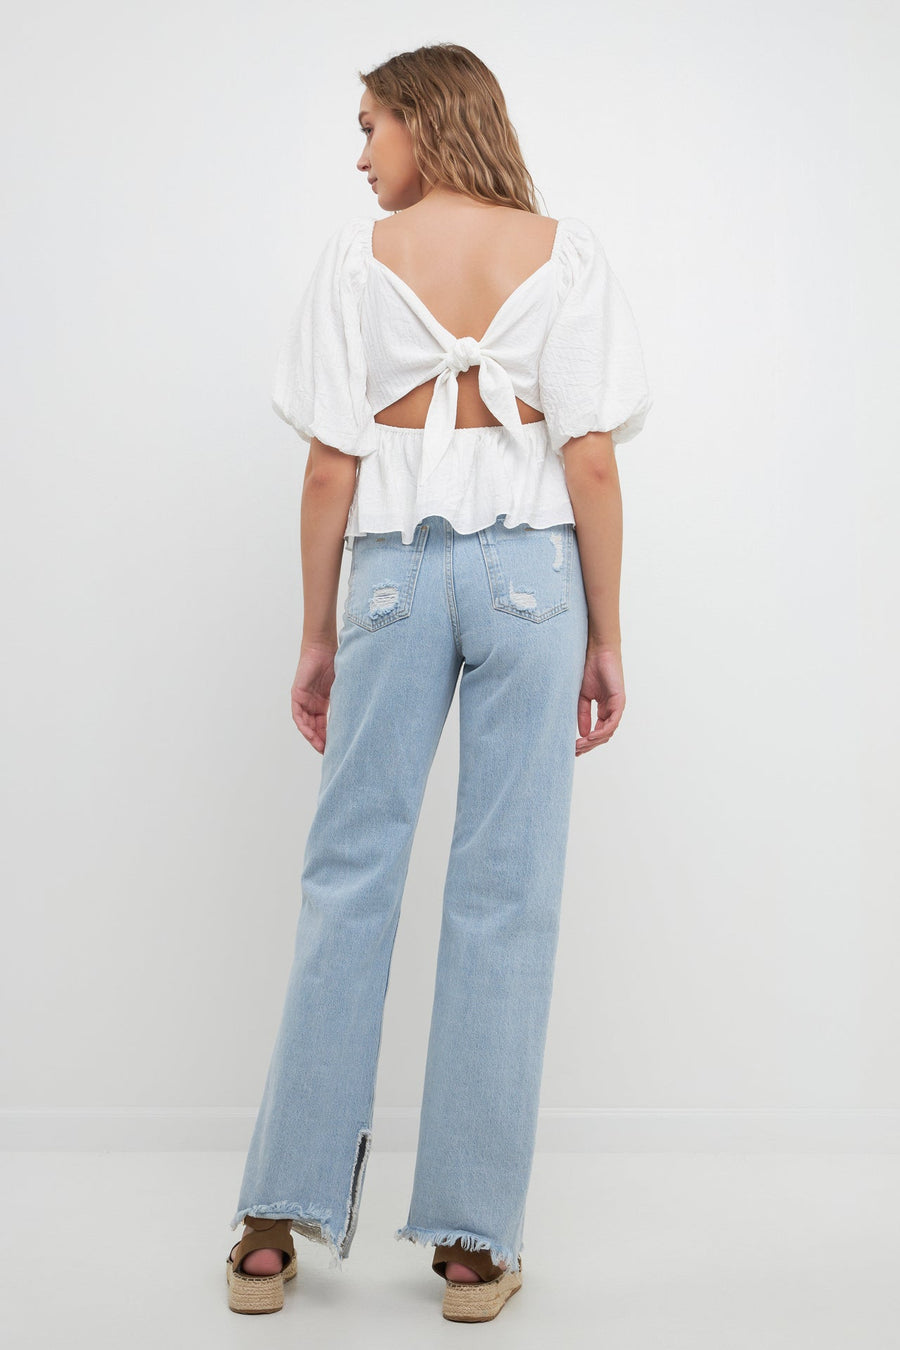 FREE THE ROSES-Textured Back Tied Top-TOPS available at Objectrare